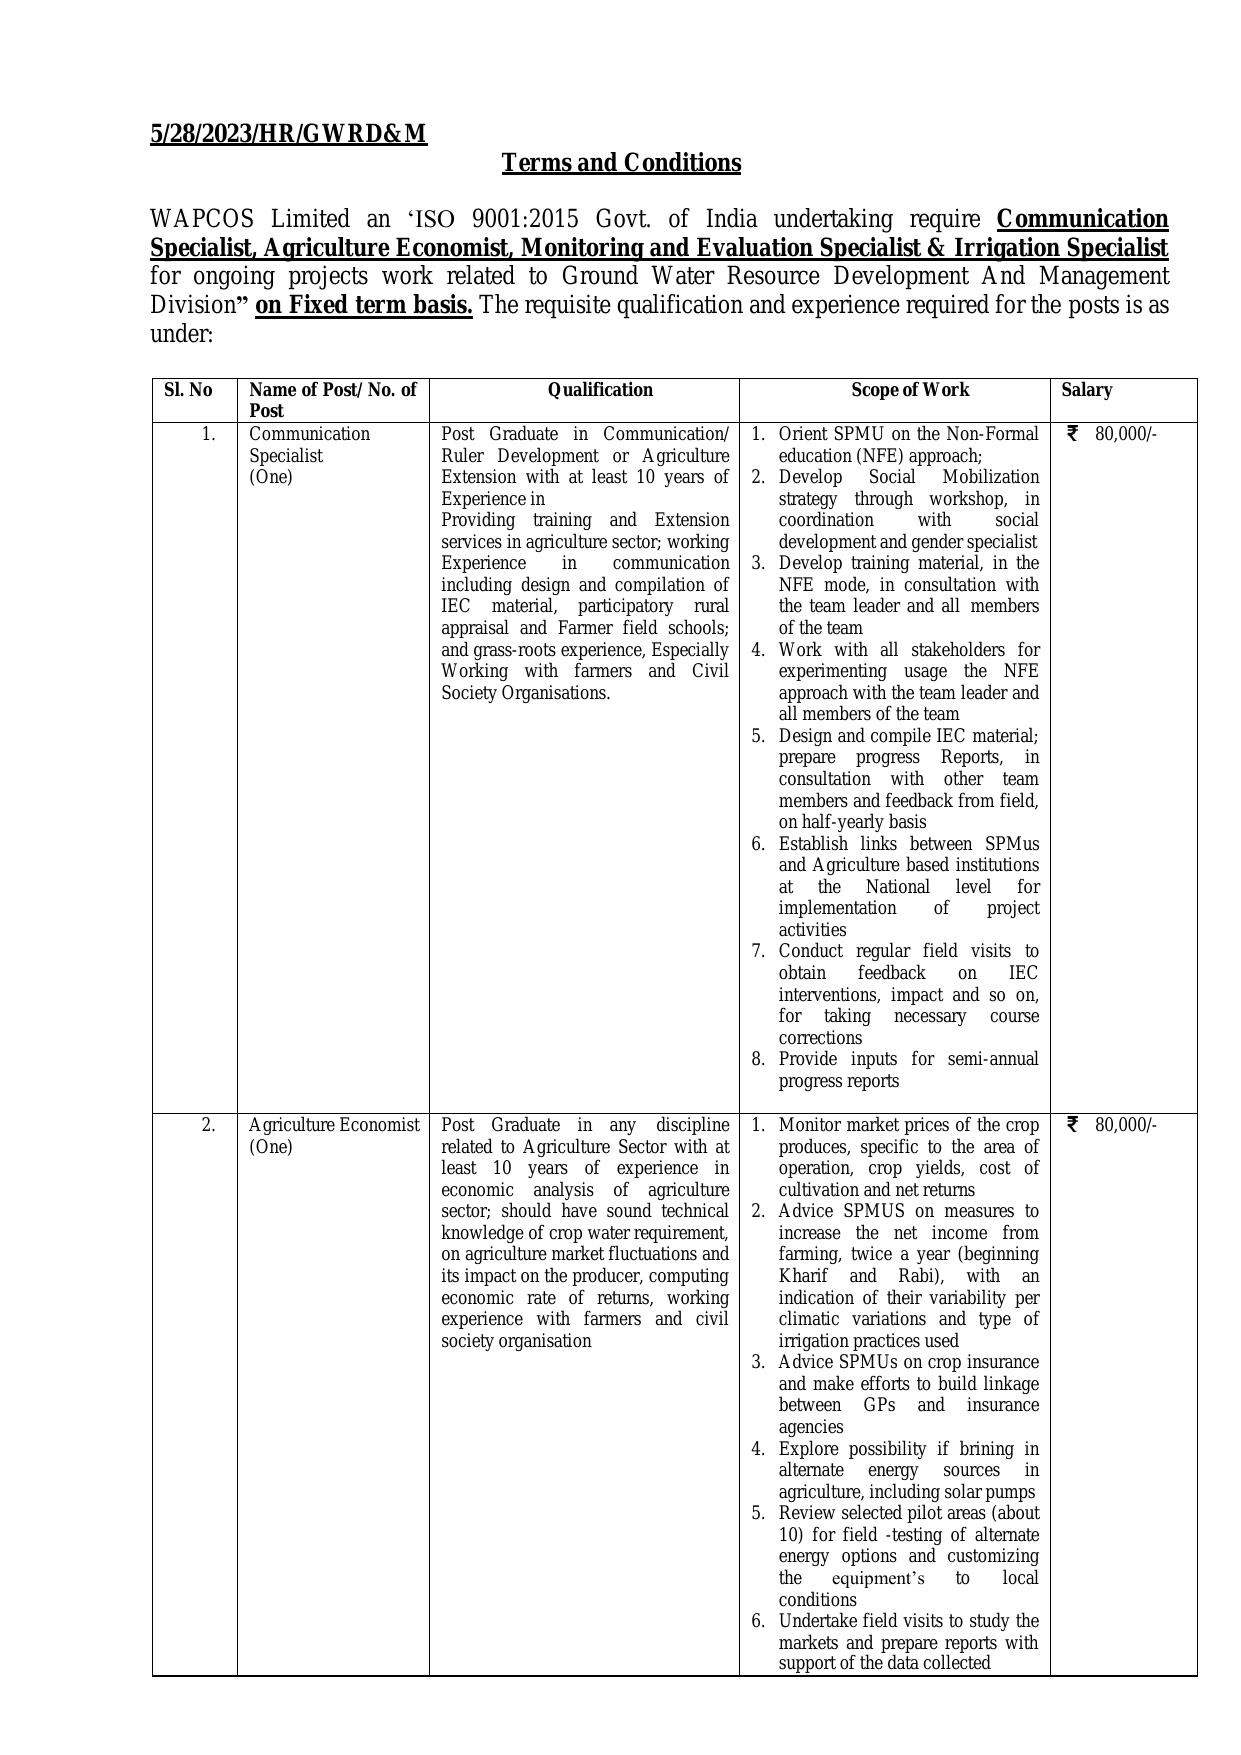 WAPCOS Limited Invites Application for Irrigation Specialist and Various Posts Recruitment 2023 - Page 3